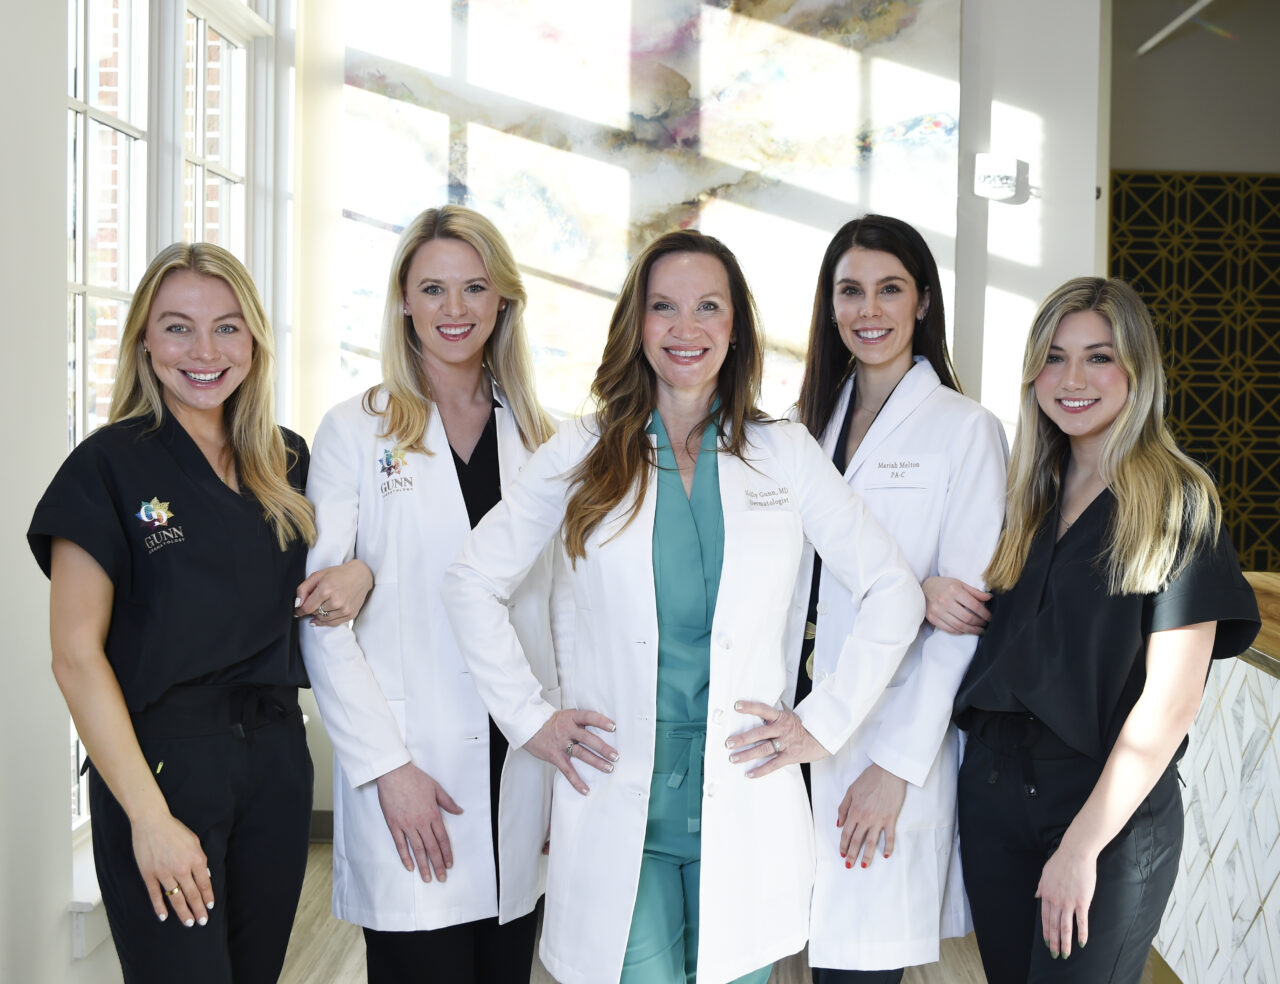 The Gunn Dermatology staff at the Lane Parke office in Mountain Brook Village on Monday, Feb. 6, 2023. Photo by Erin Nelson.